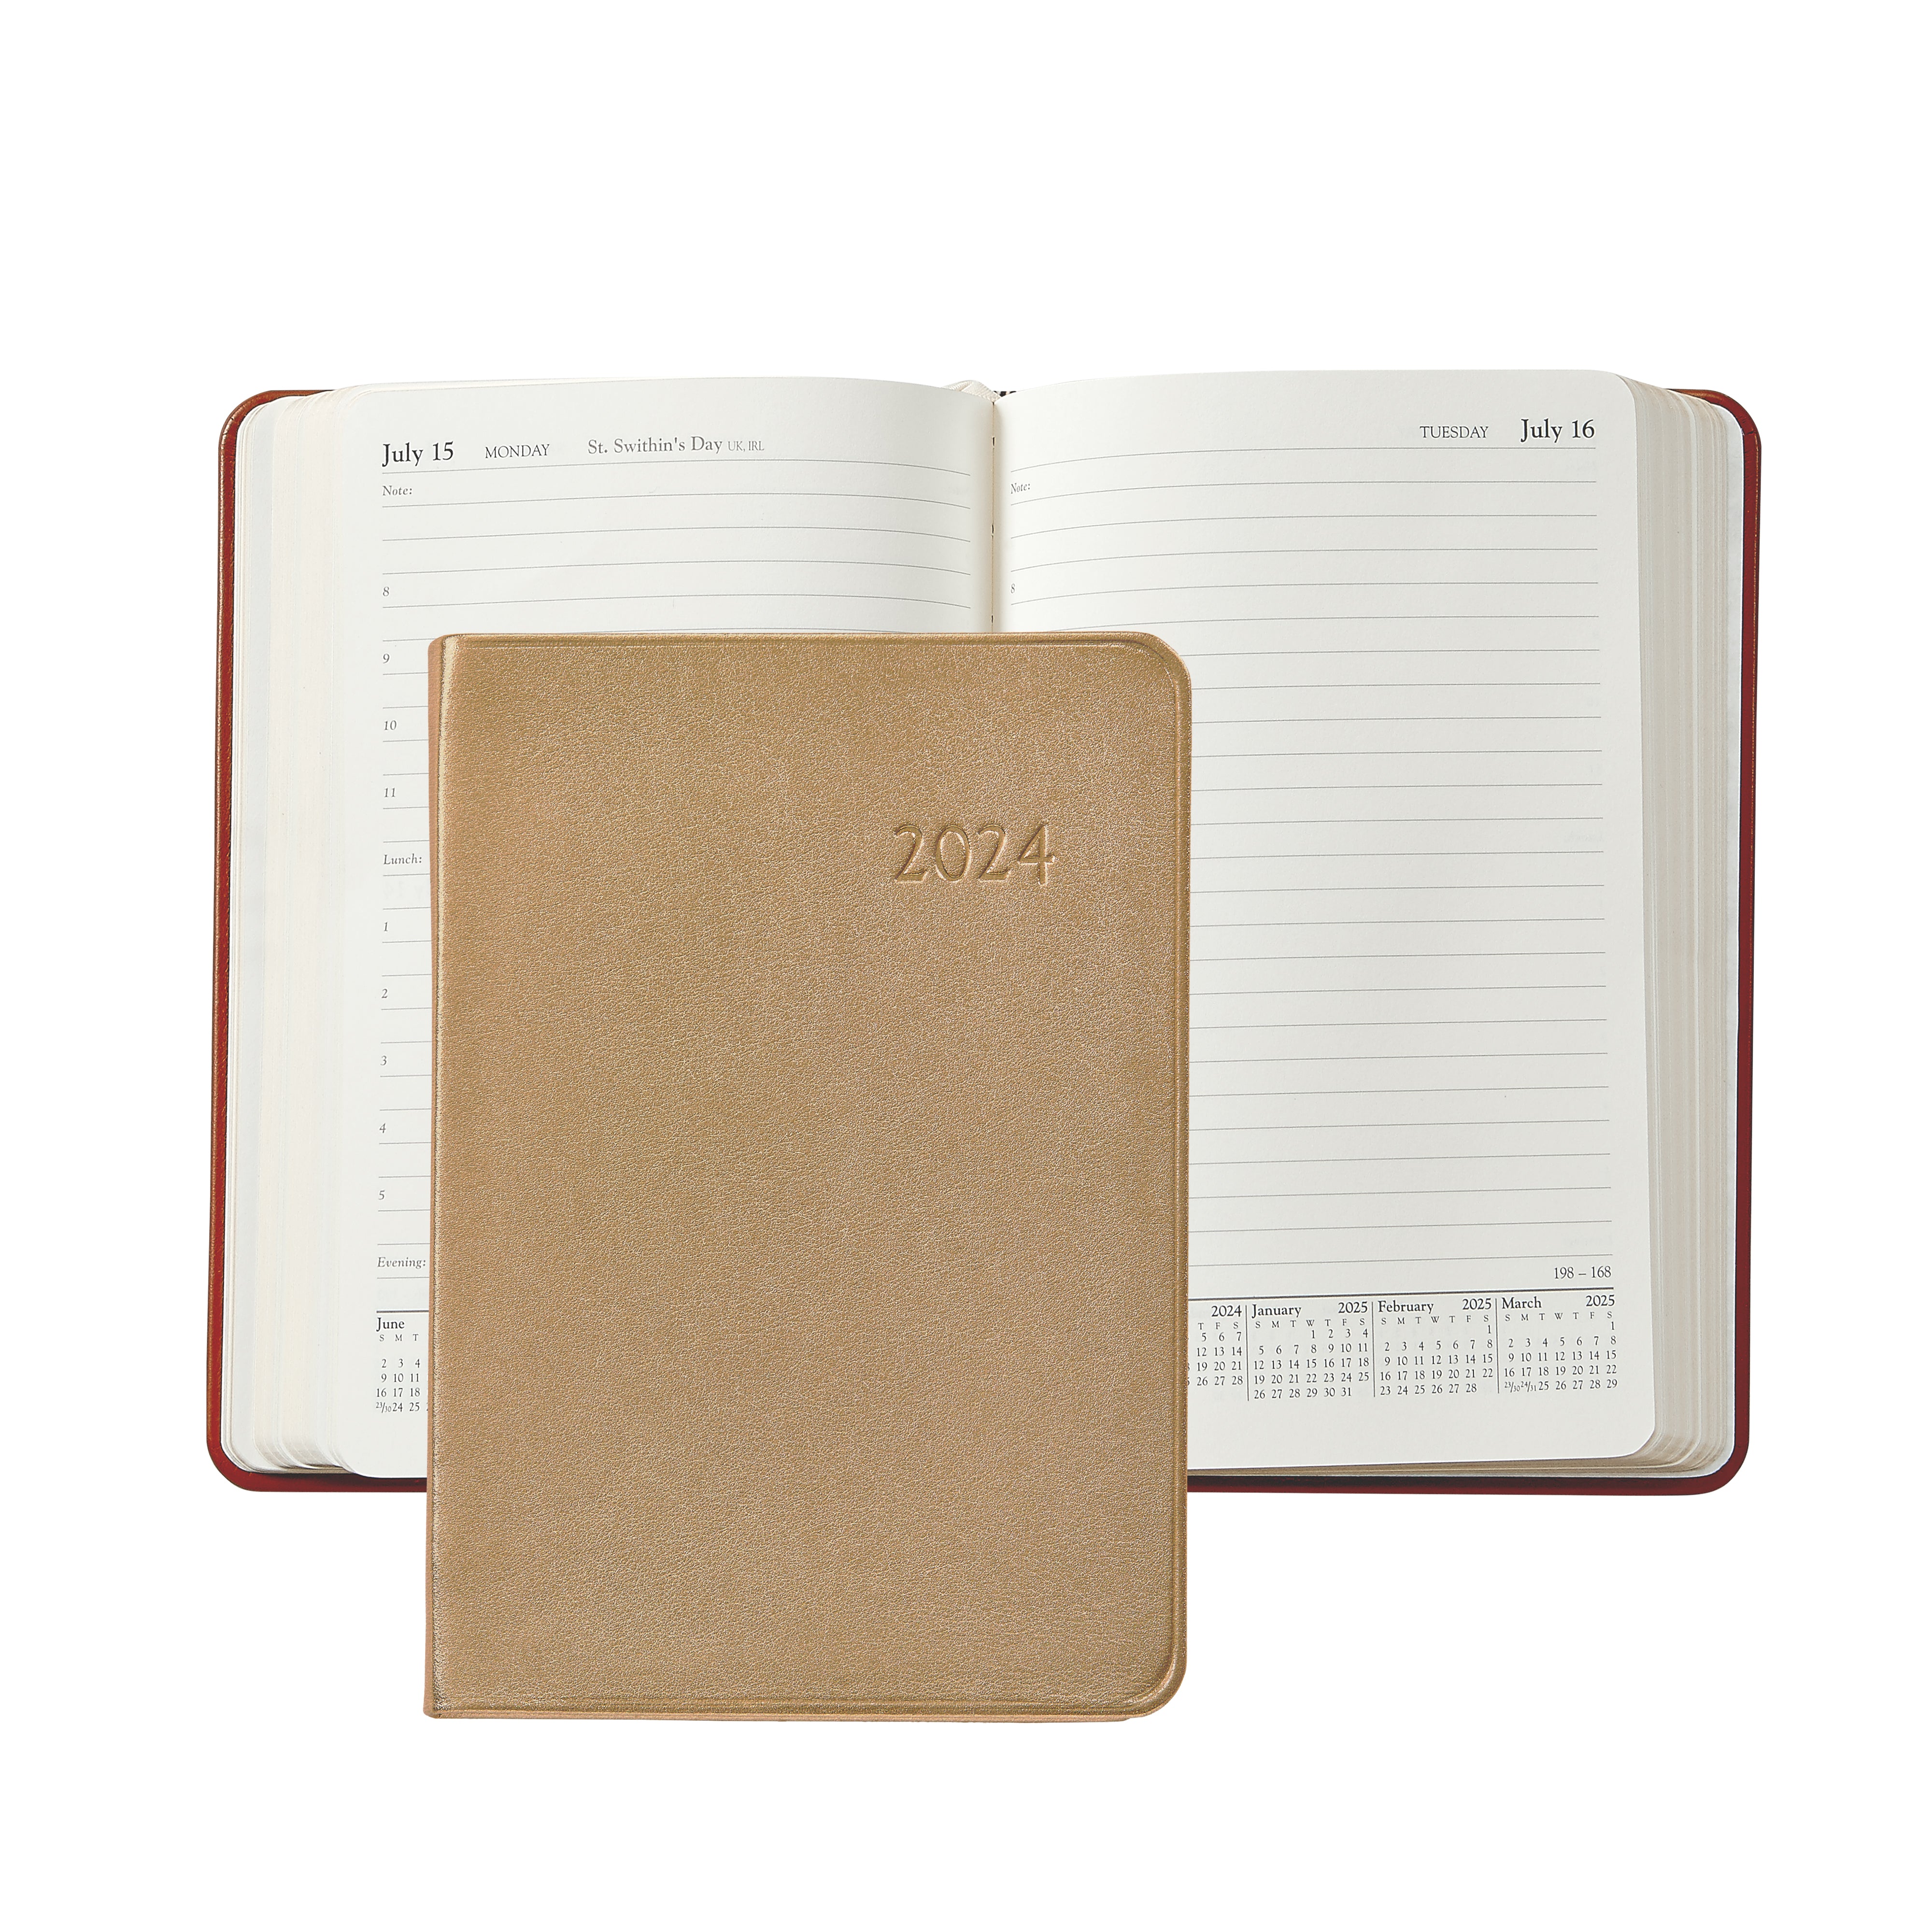 Graphic Image 2024 Daily Journal Planner White Gold Goatskin Leather